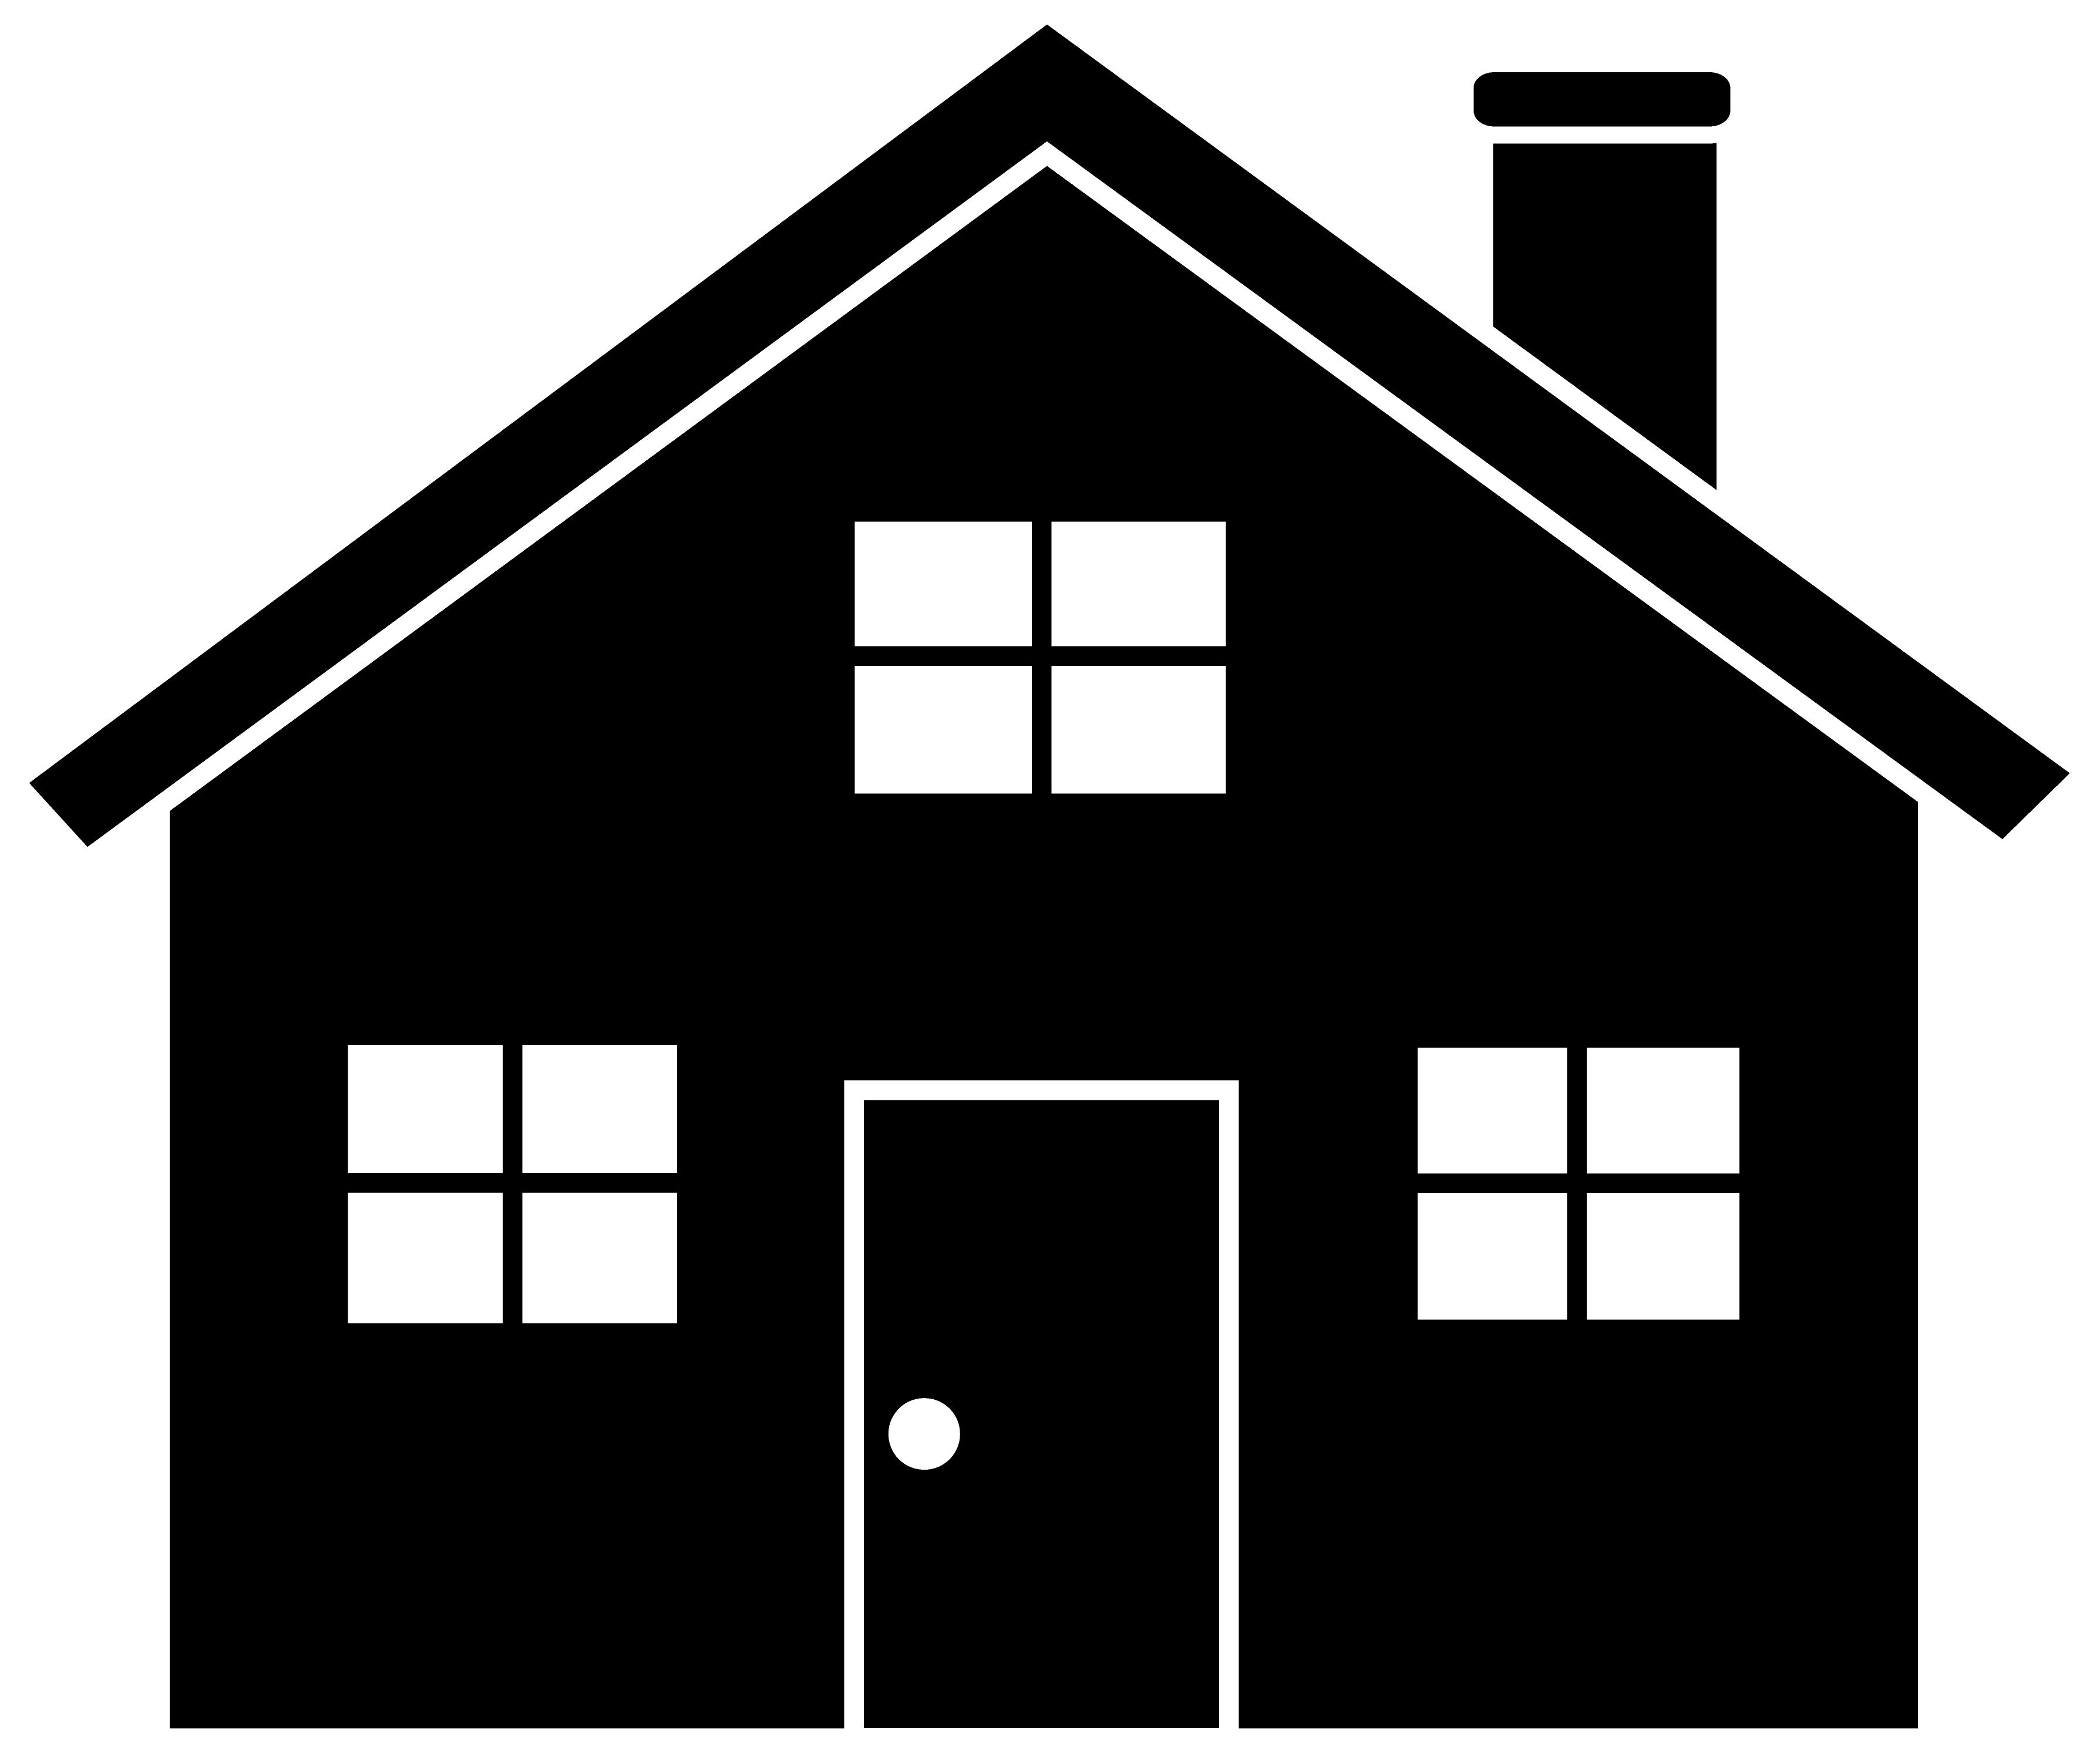 image of house Black Background Graphics.